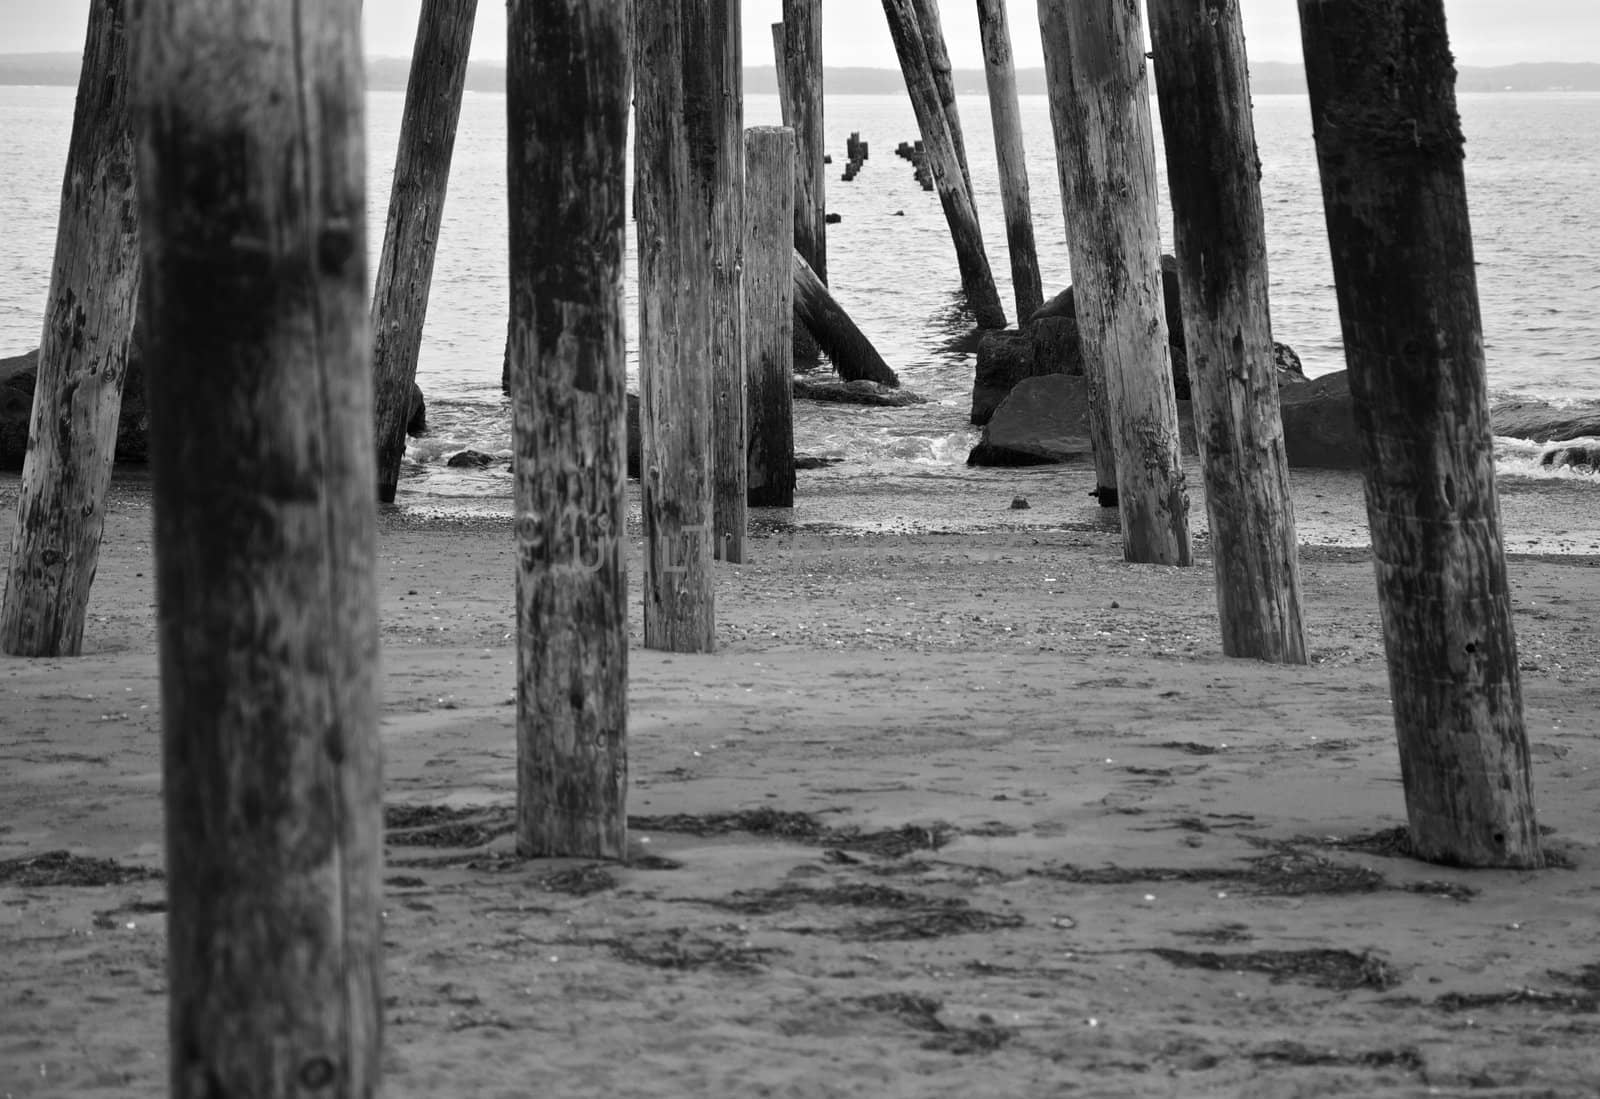 Reminents of an old ocean pier in perspective as black and white image